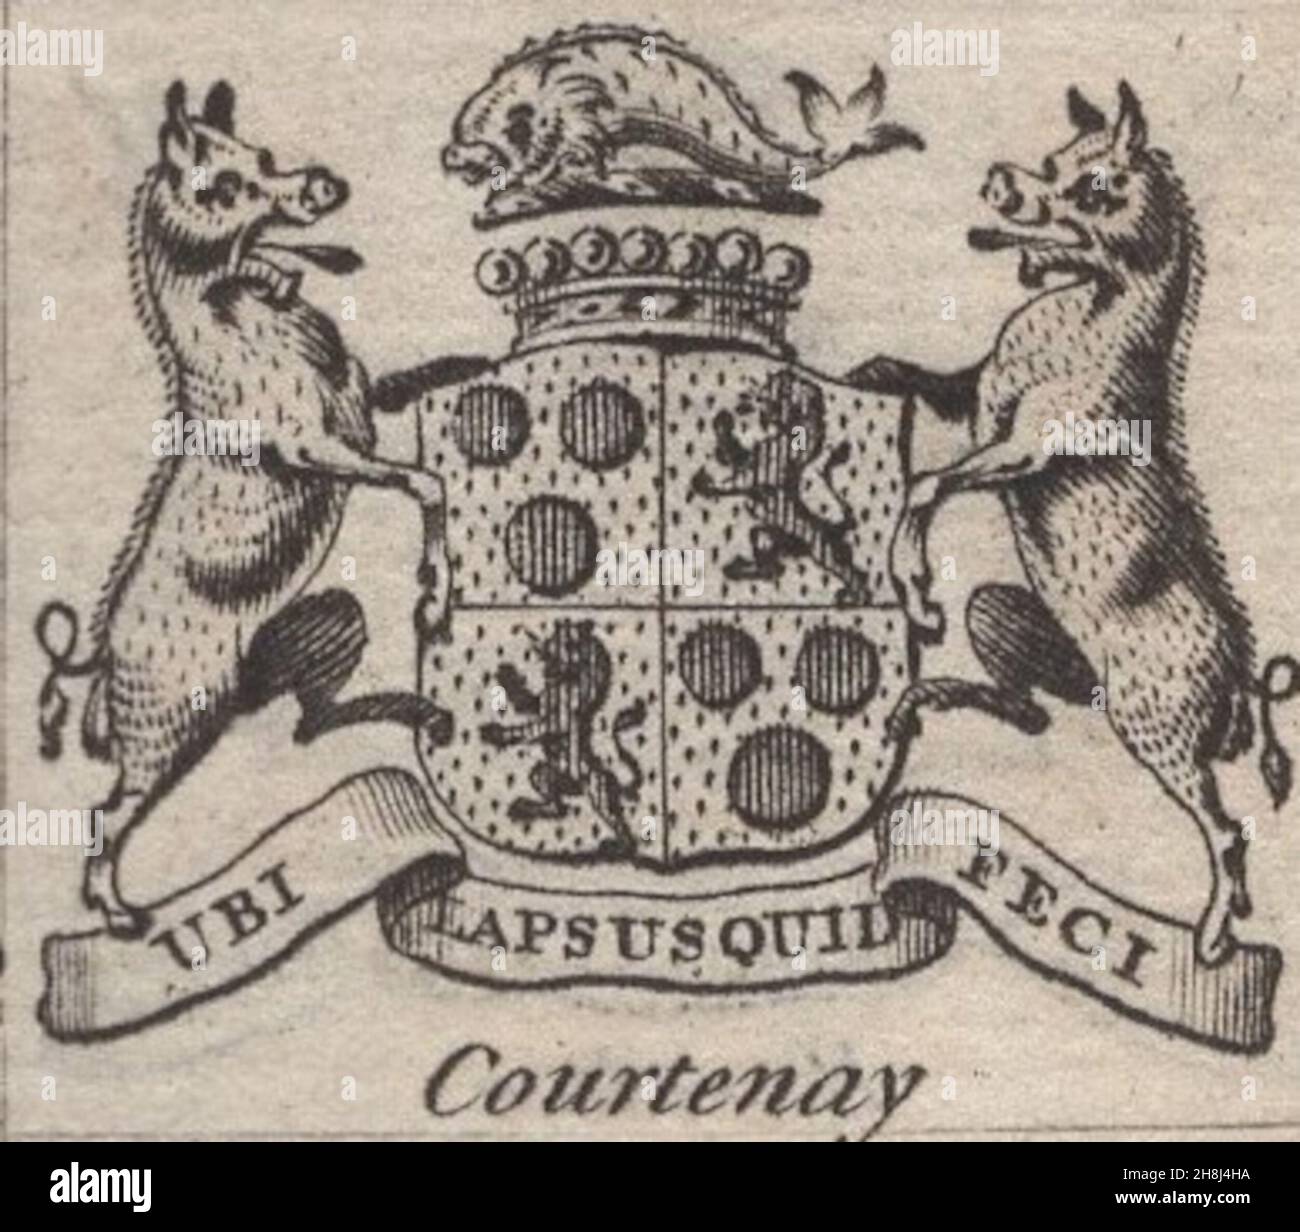 antique 18th century engraving heraldy coats of arms, English Viscounts , Motto / slogan: Ubi Lapsus quid Feci. Courtenay. by Woodman & Mutlow fc russel co circa 1780s Source: original engravings from  the annual almanach book. Stock Photo